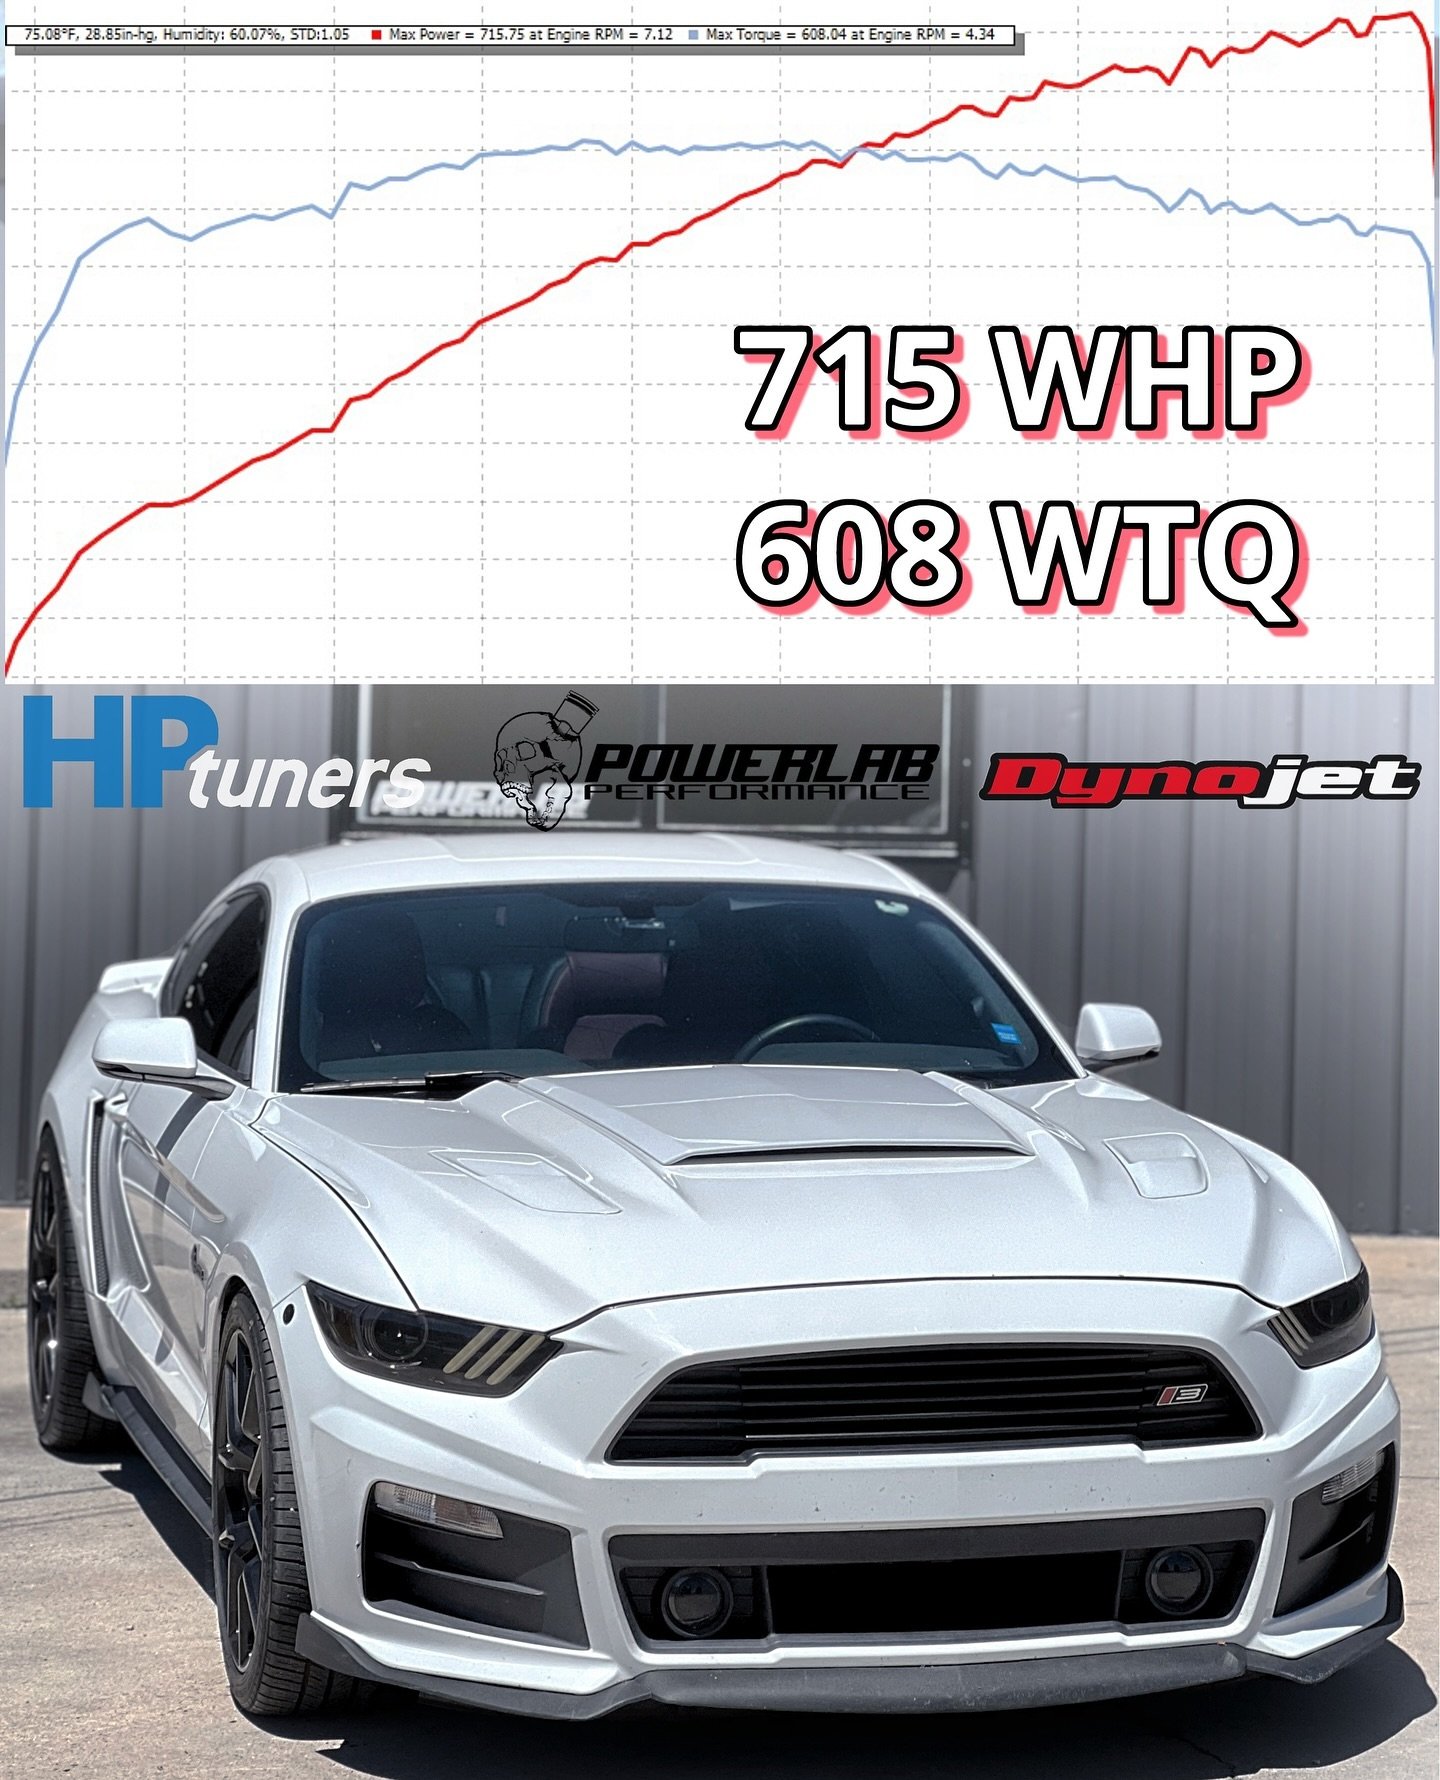 2015 ROUSH STG-3 🏁
 
JLT / PULLEY / EXHAUST / 93+BOOSTER 🏎️💨
 
Remote Tuning From $199 | Dyno Tuning From $499
 
 
🟡 Late-Model Ford Performance
🟡 Dyno &amp; Remote Tuning
🟡 Performance Parts
🟢 Financing Available
🔴 Email For Support | No DMs